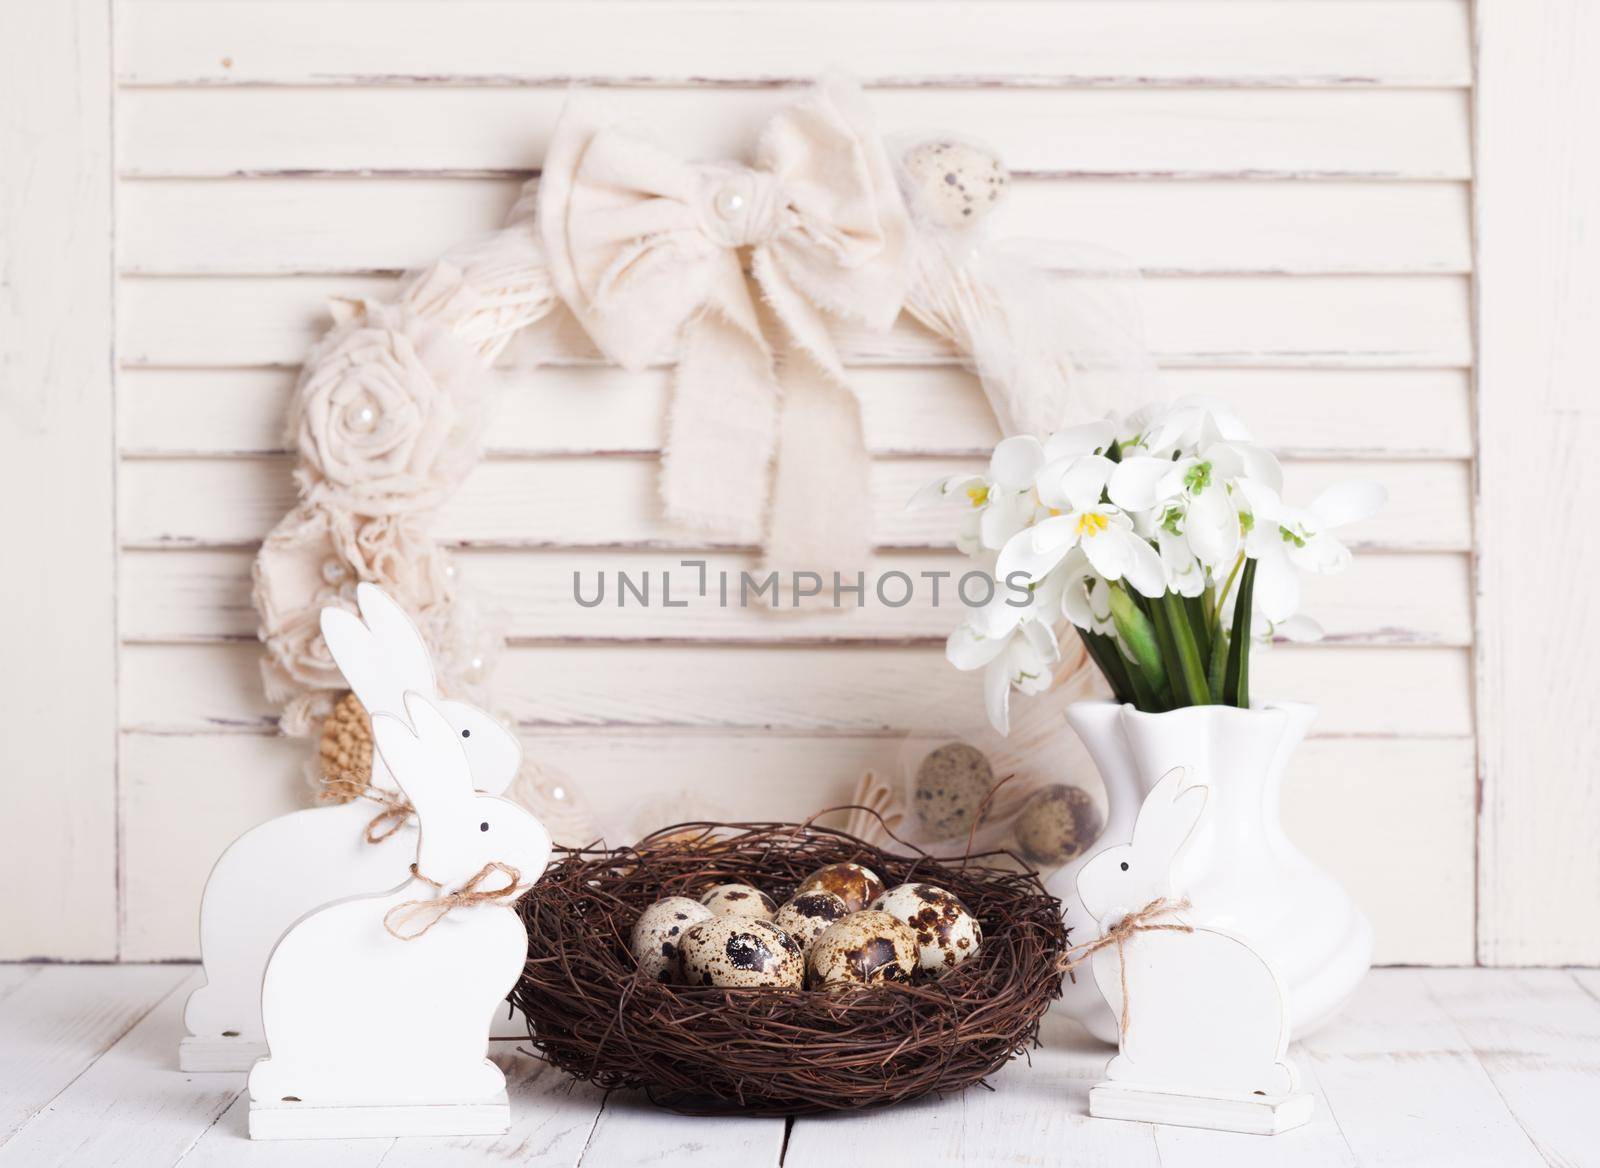 Easter decorations - shabby chic white rabbits and wreath